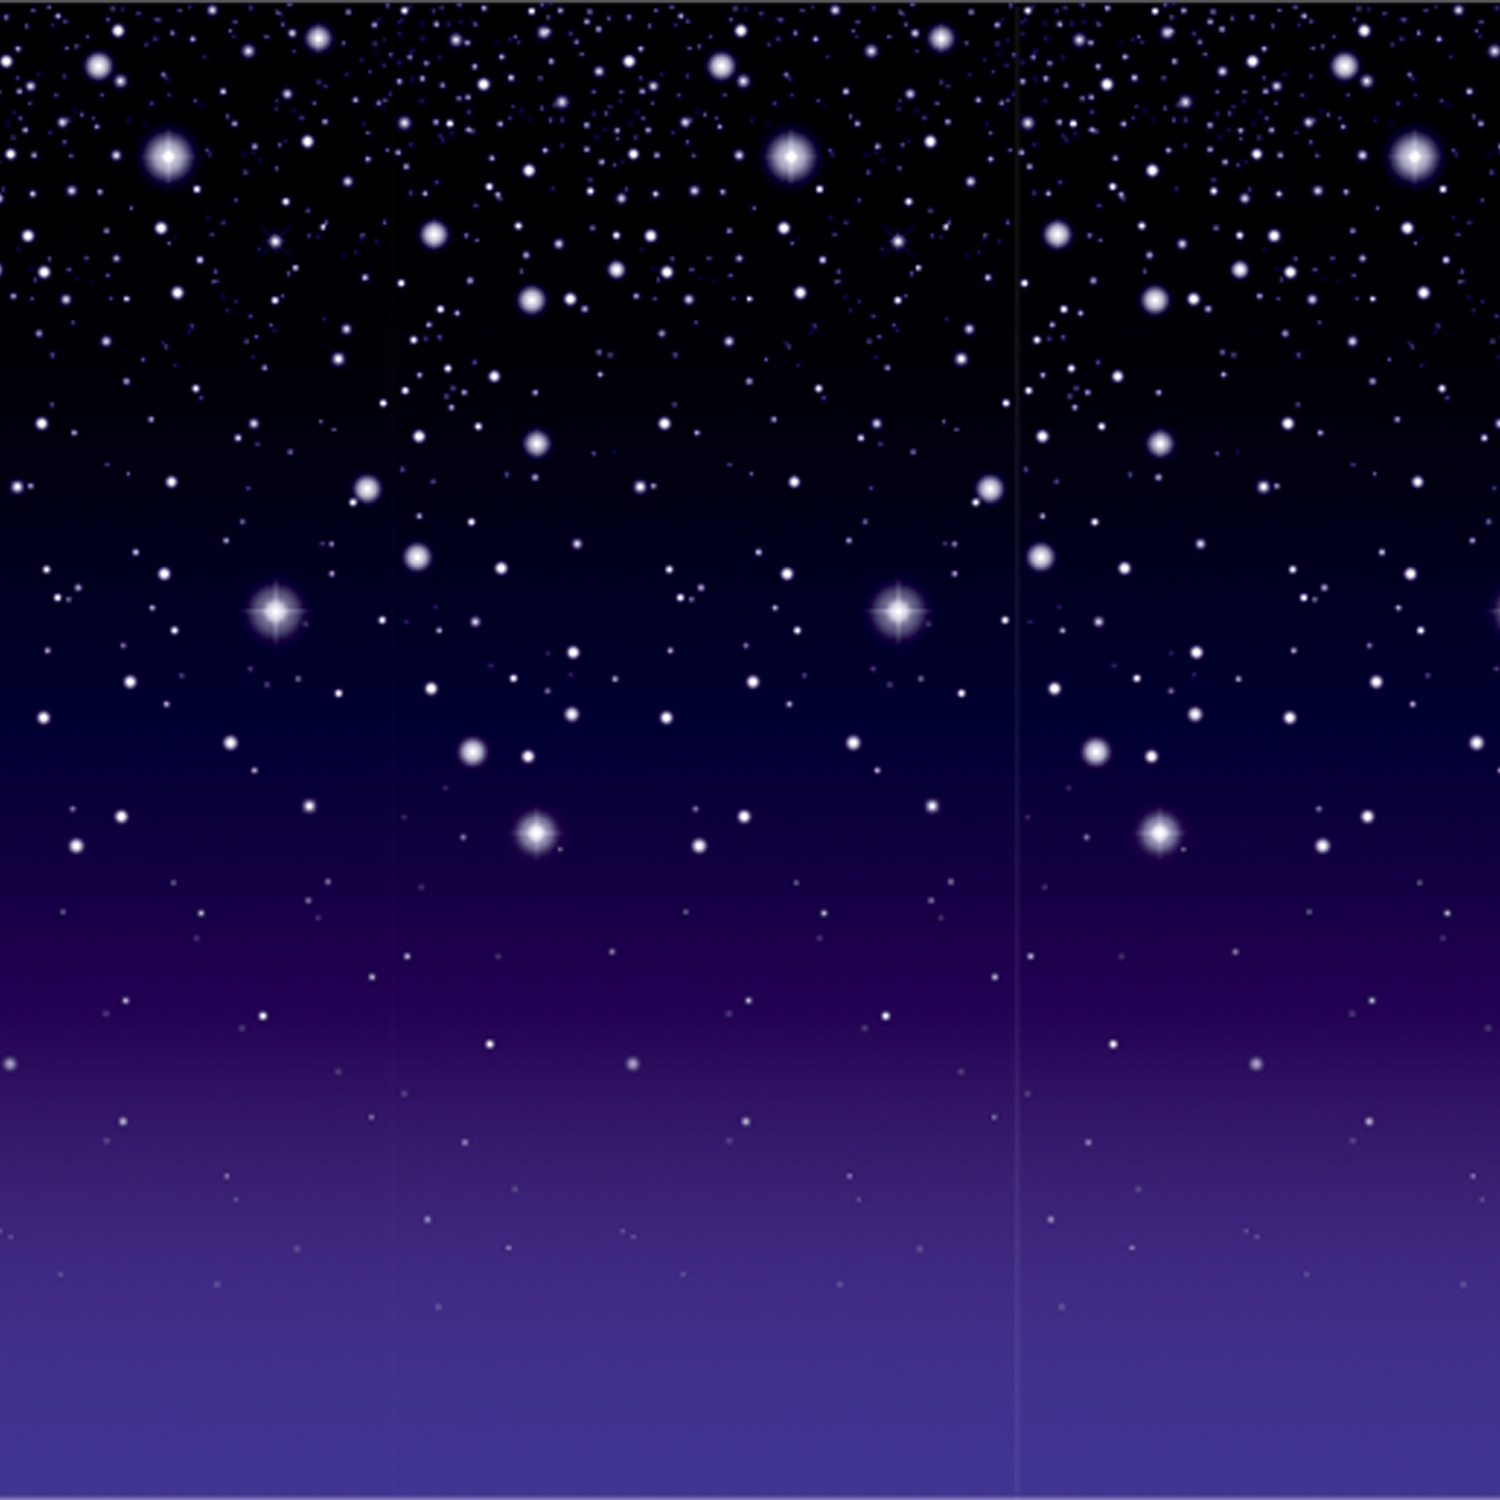 Starry night photo backdrop with soft purple on the bottom and dark black with stars on the top.